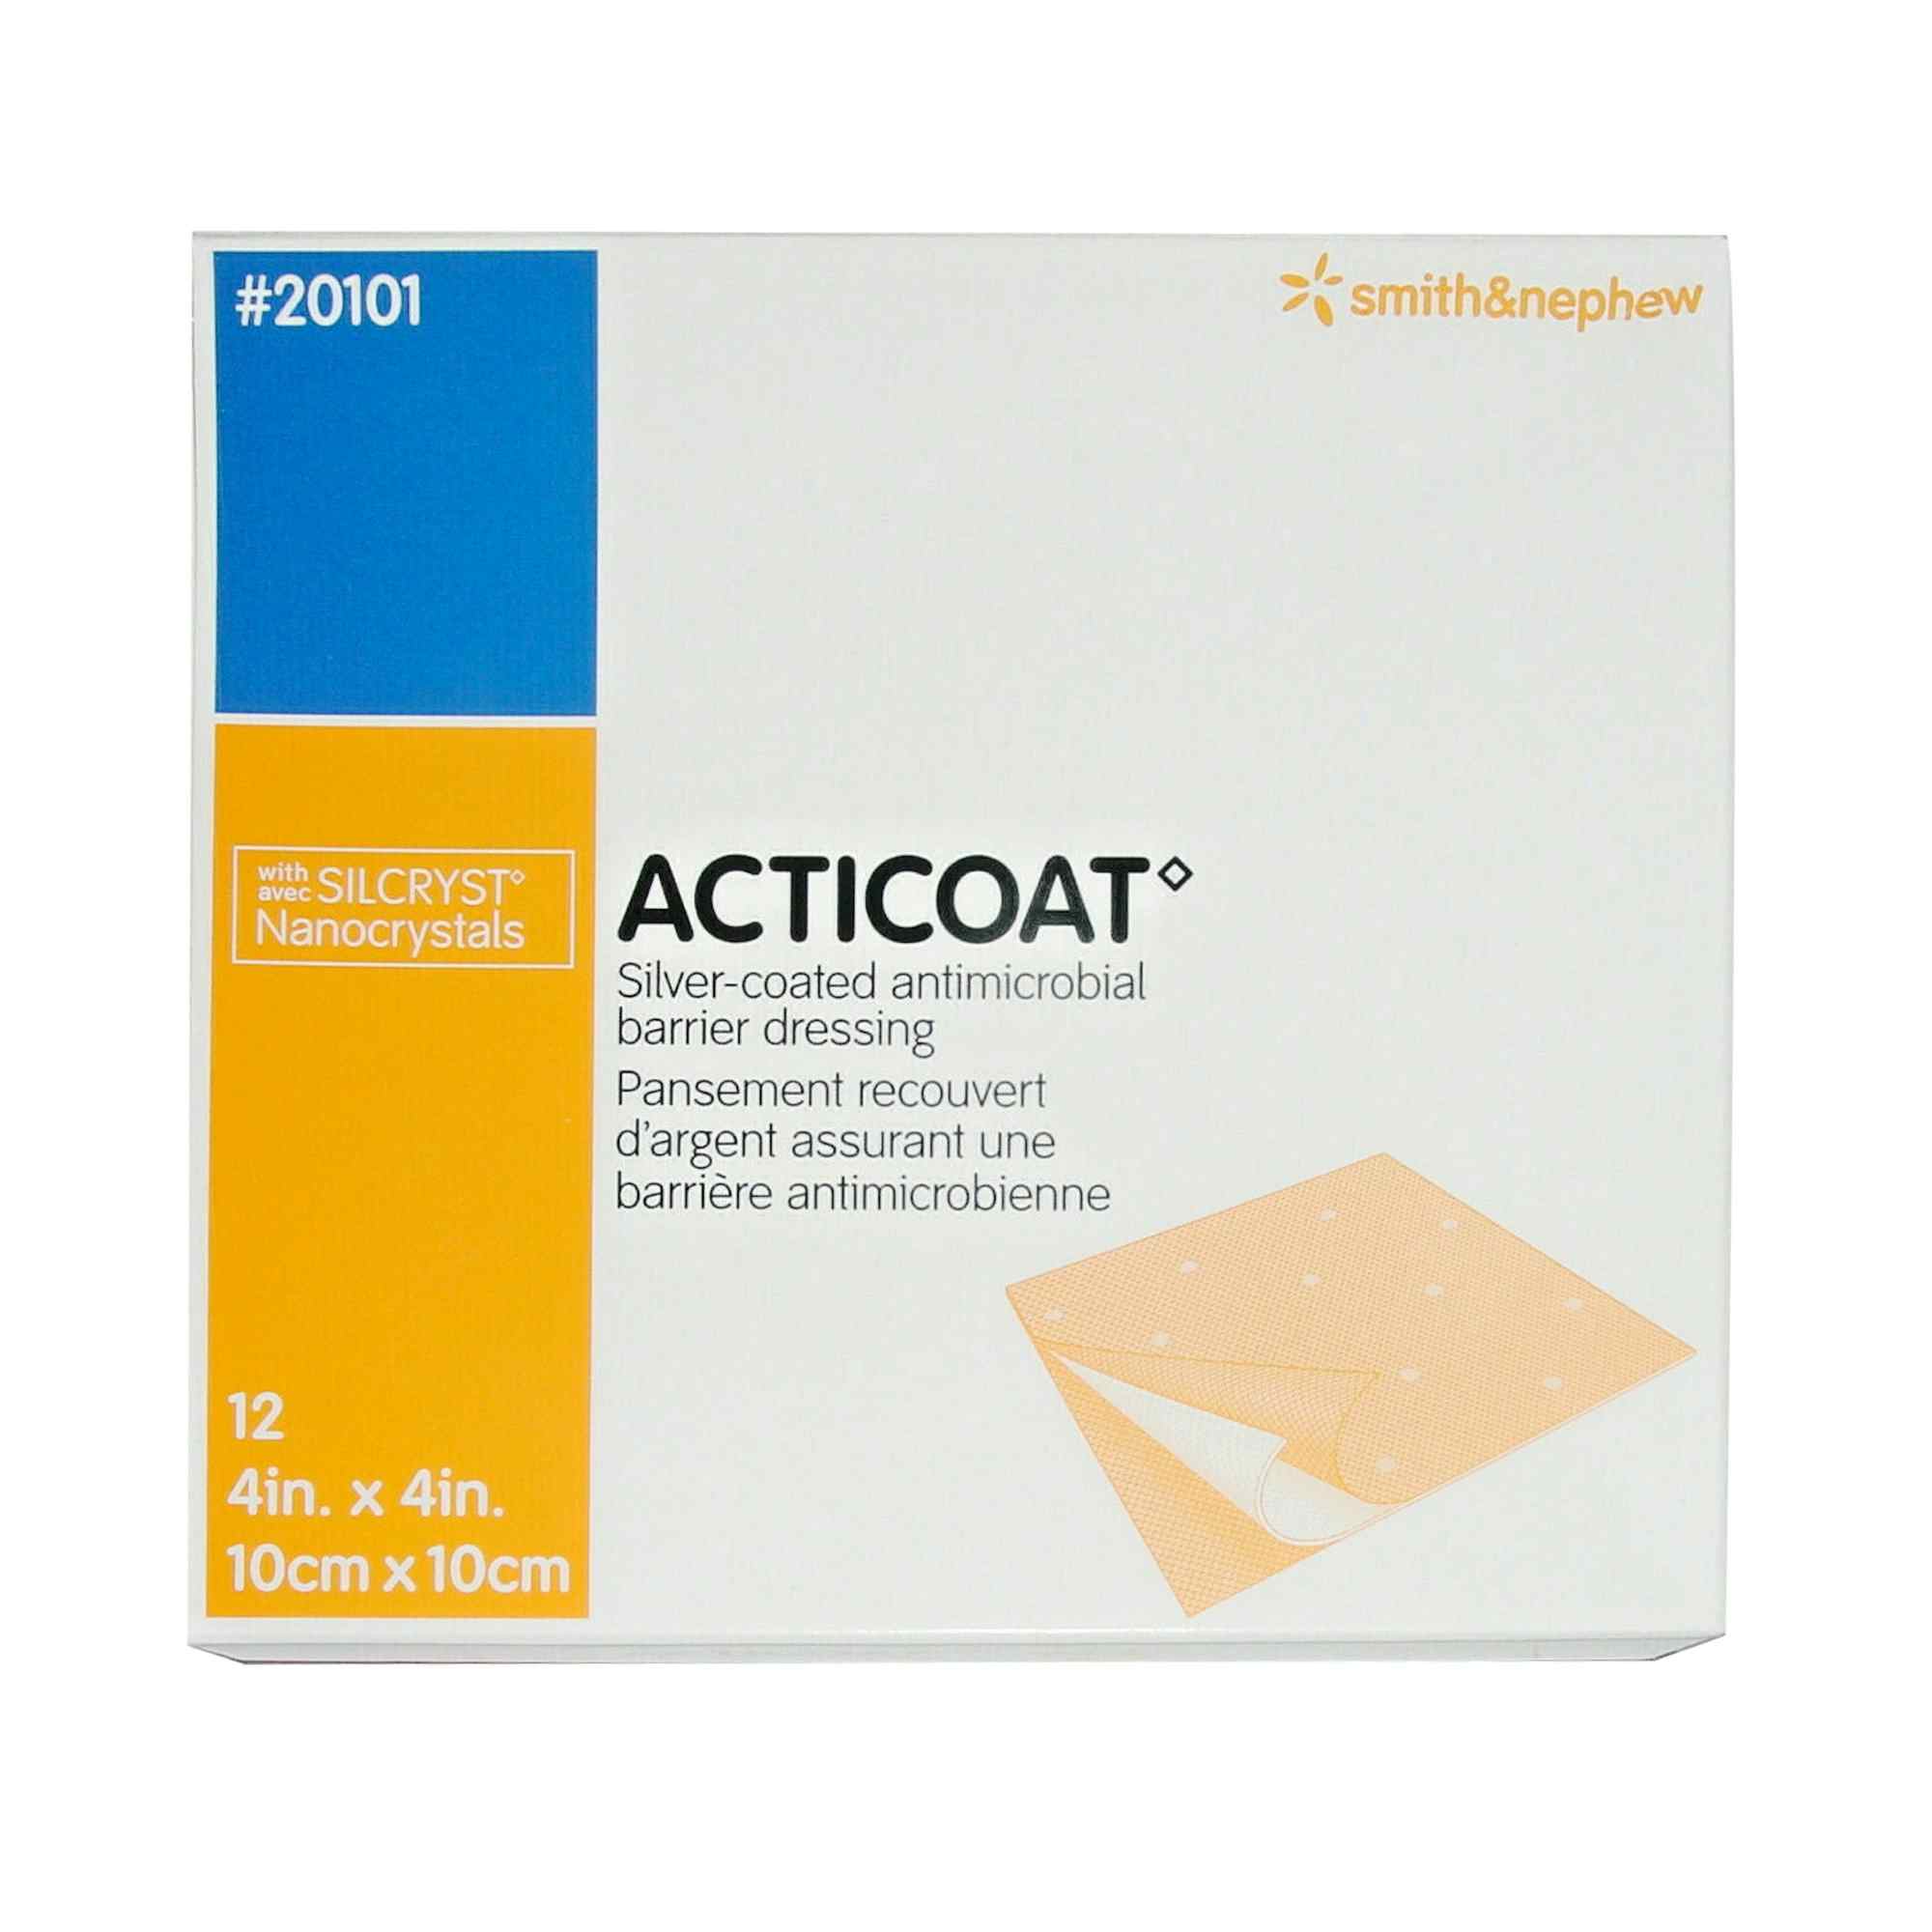 Acticoat Silver-coated Antimicrobial Barrier Dressing, 4 X 4"